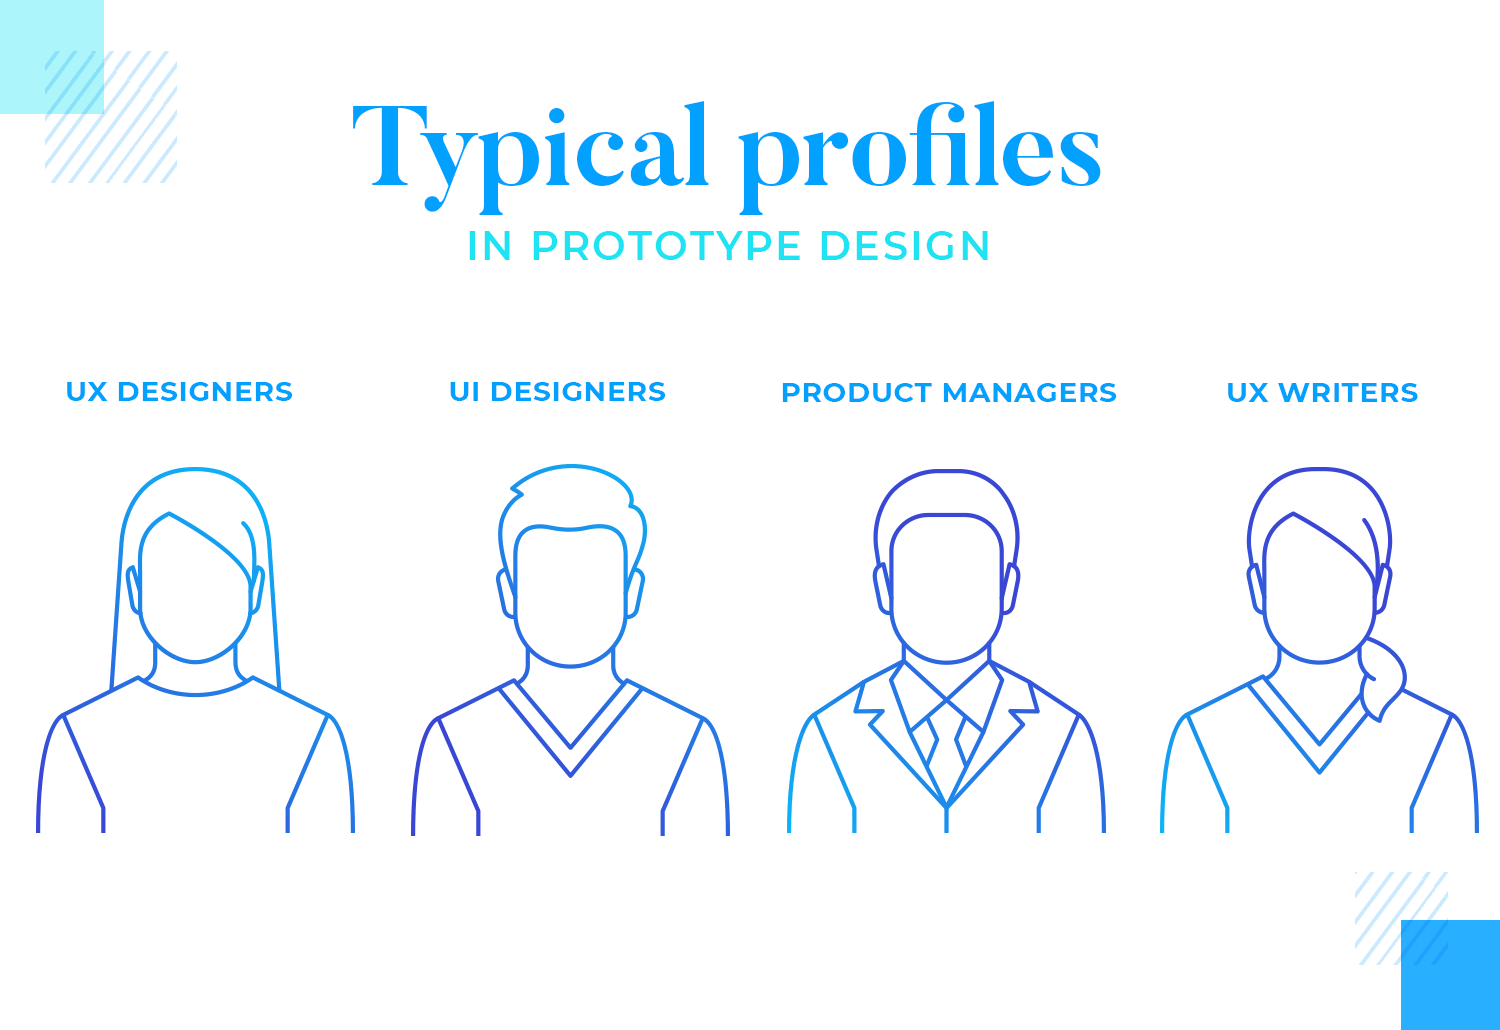 Typical profiles involved in prototyping